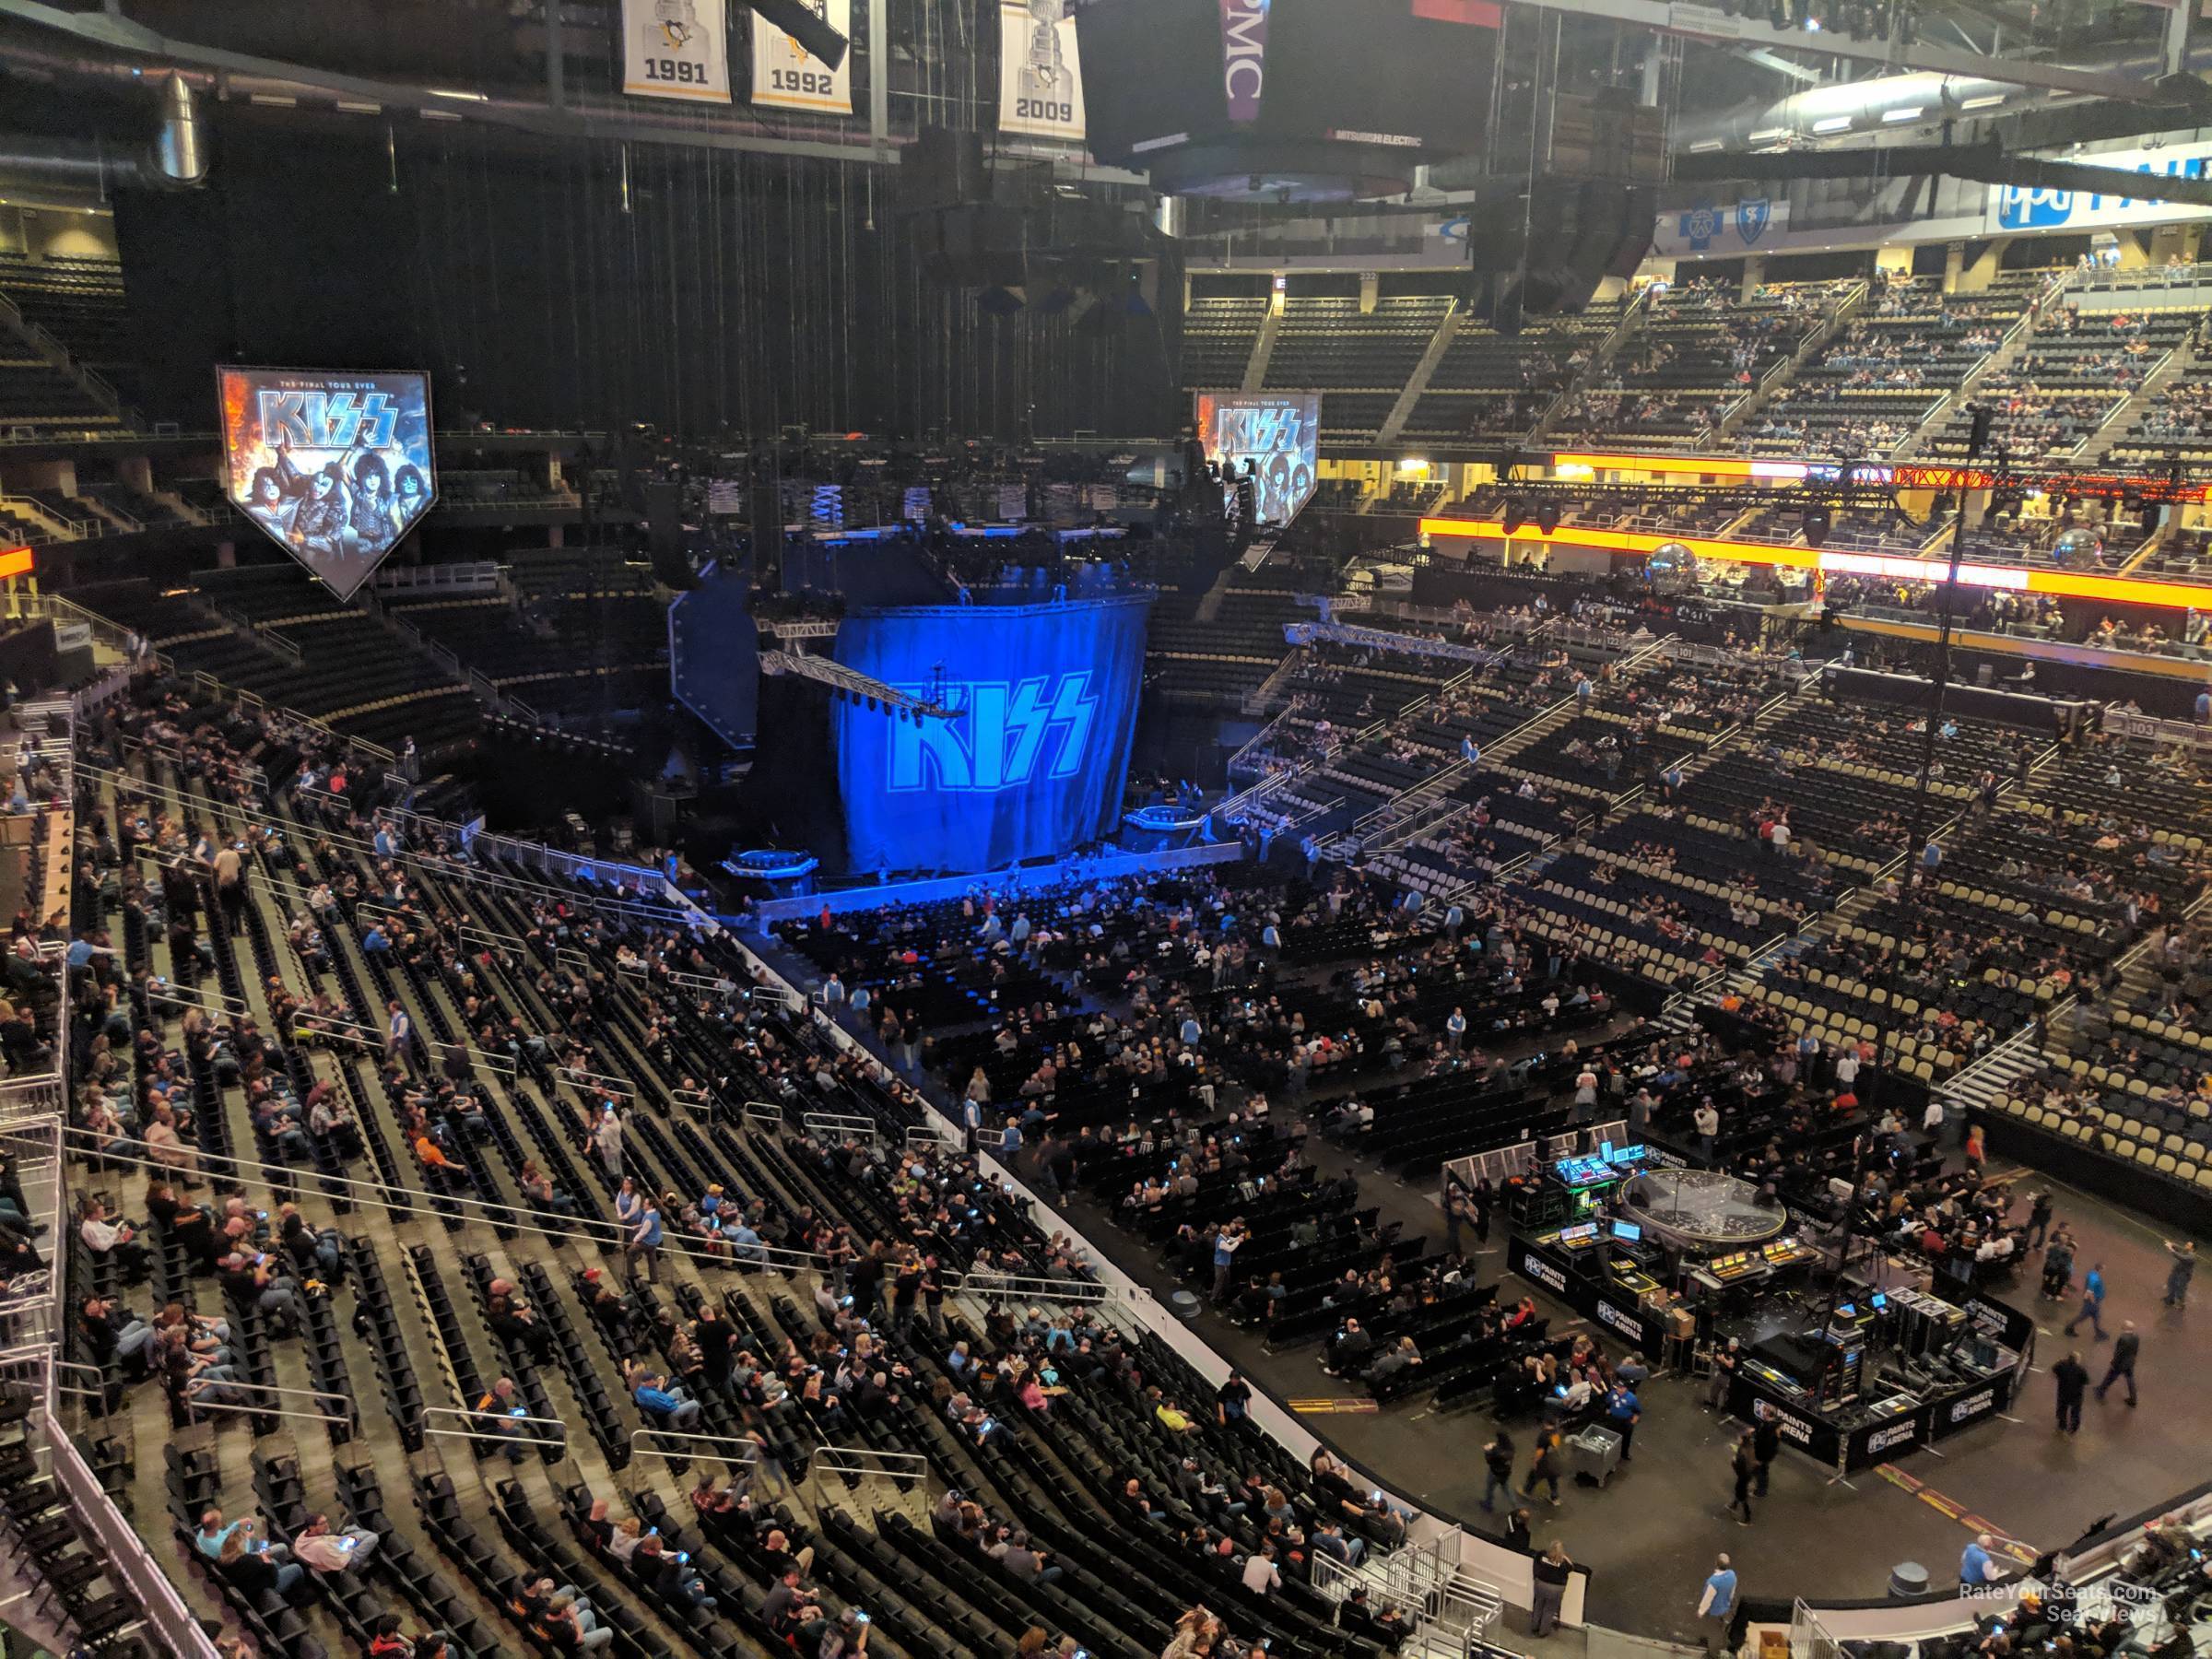 Section 215 at PPG Paints Arena